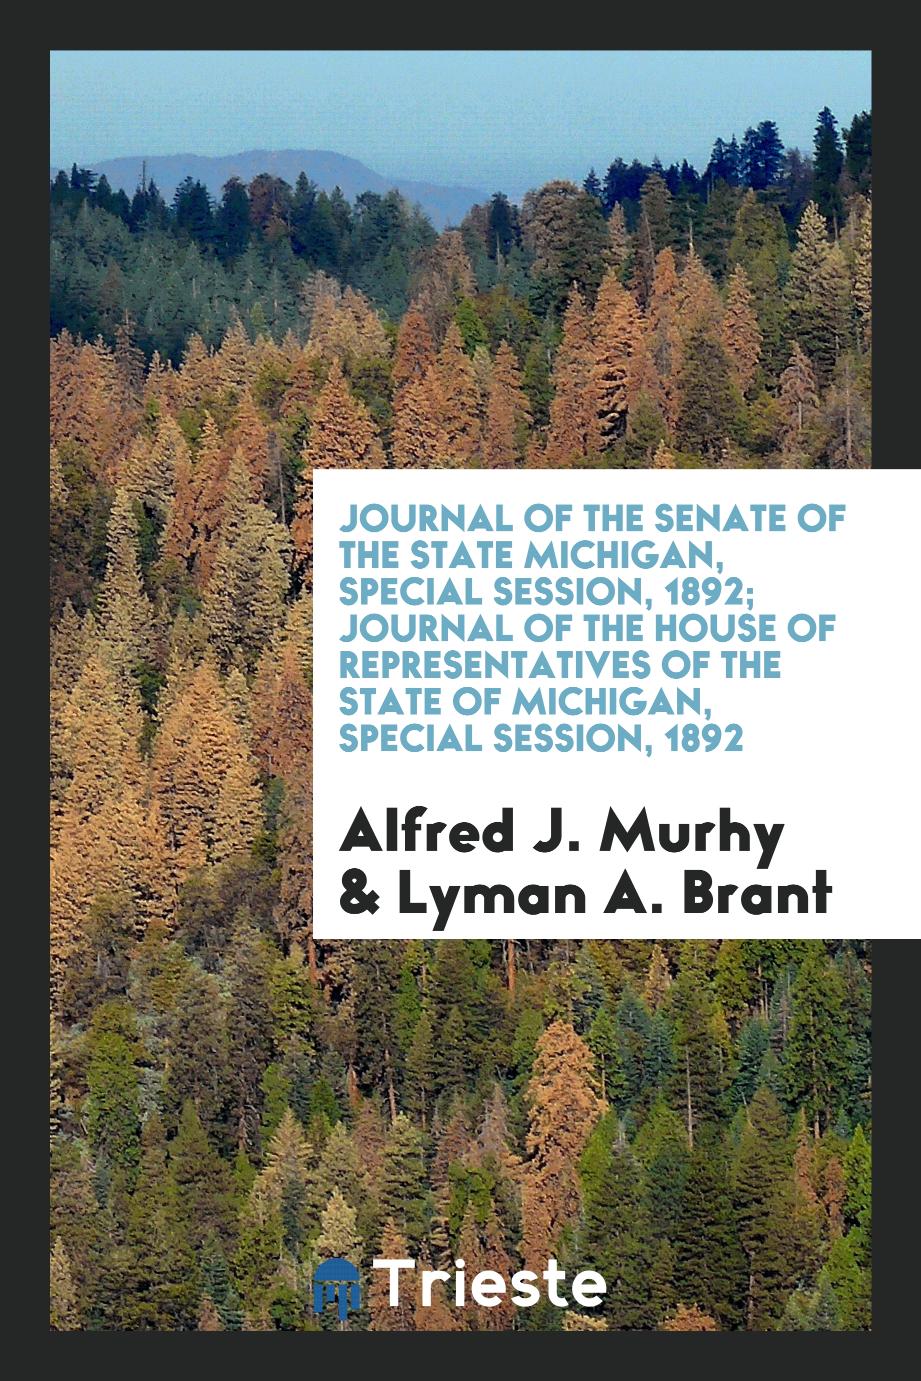 Journal of the Senate of the State Michigan, Special Session, 1892; Journal of the House of Representatives of the State of Michigan, Special Session, 1892